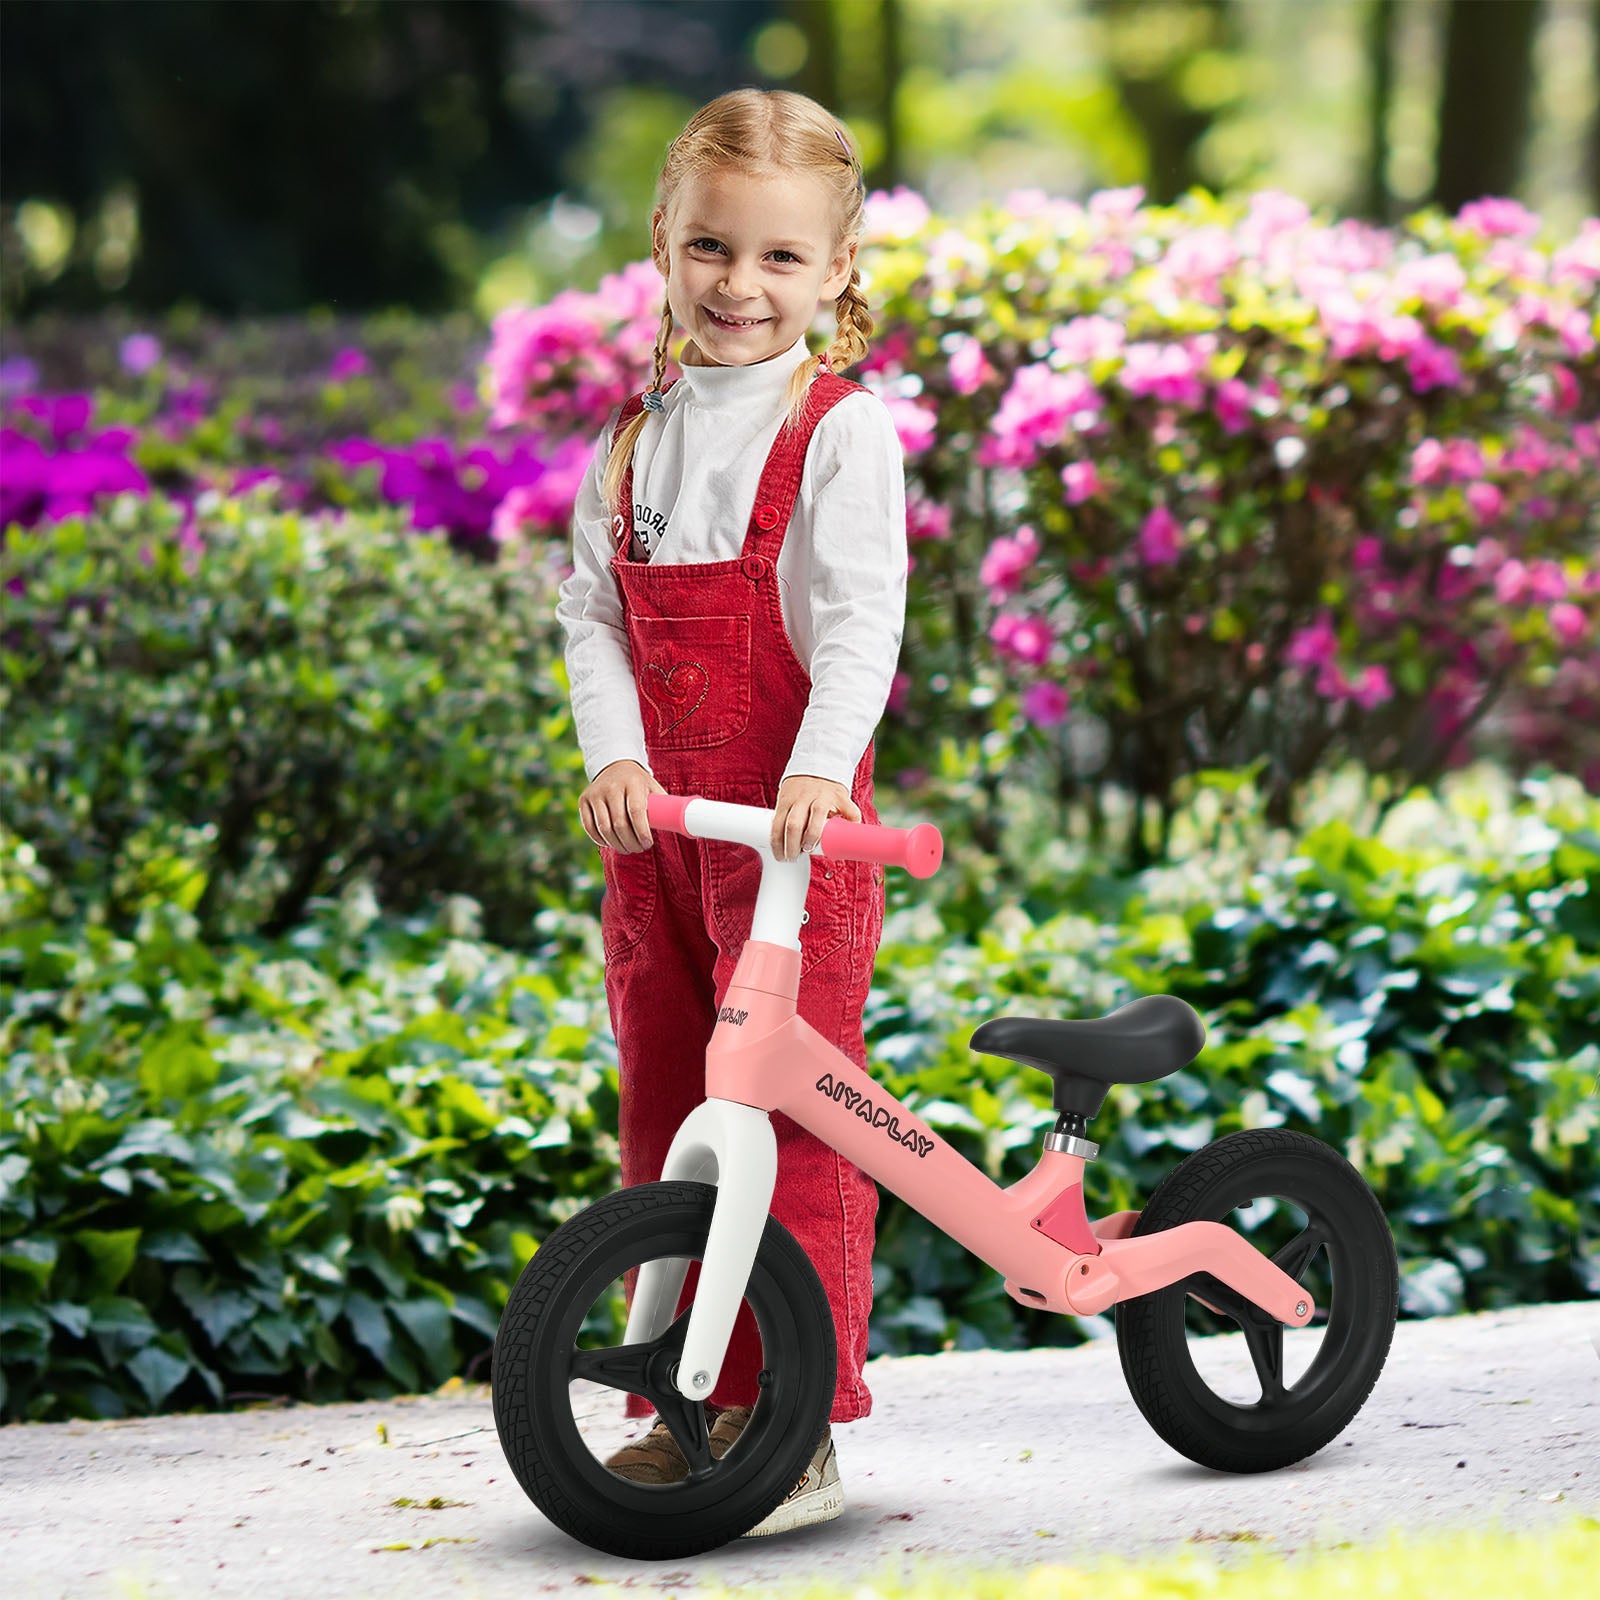 AIYAPLAY Balance Bike Toddler with Adjustable Seat and Handlebar, PU Wheels, No Pedal, Aged 30-60 Months up to 25kg - Pink